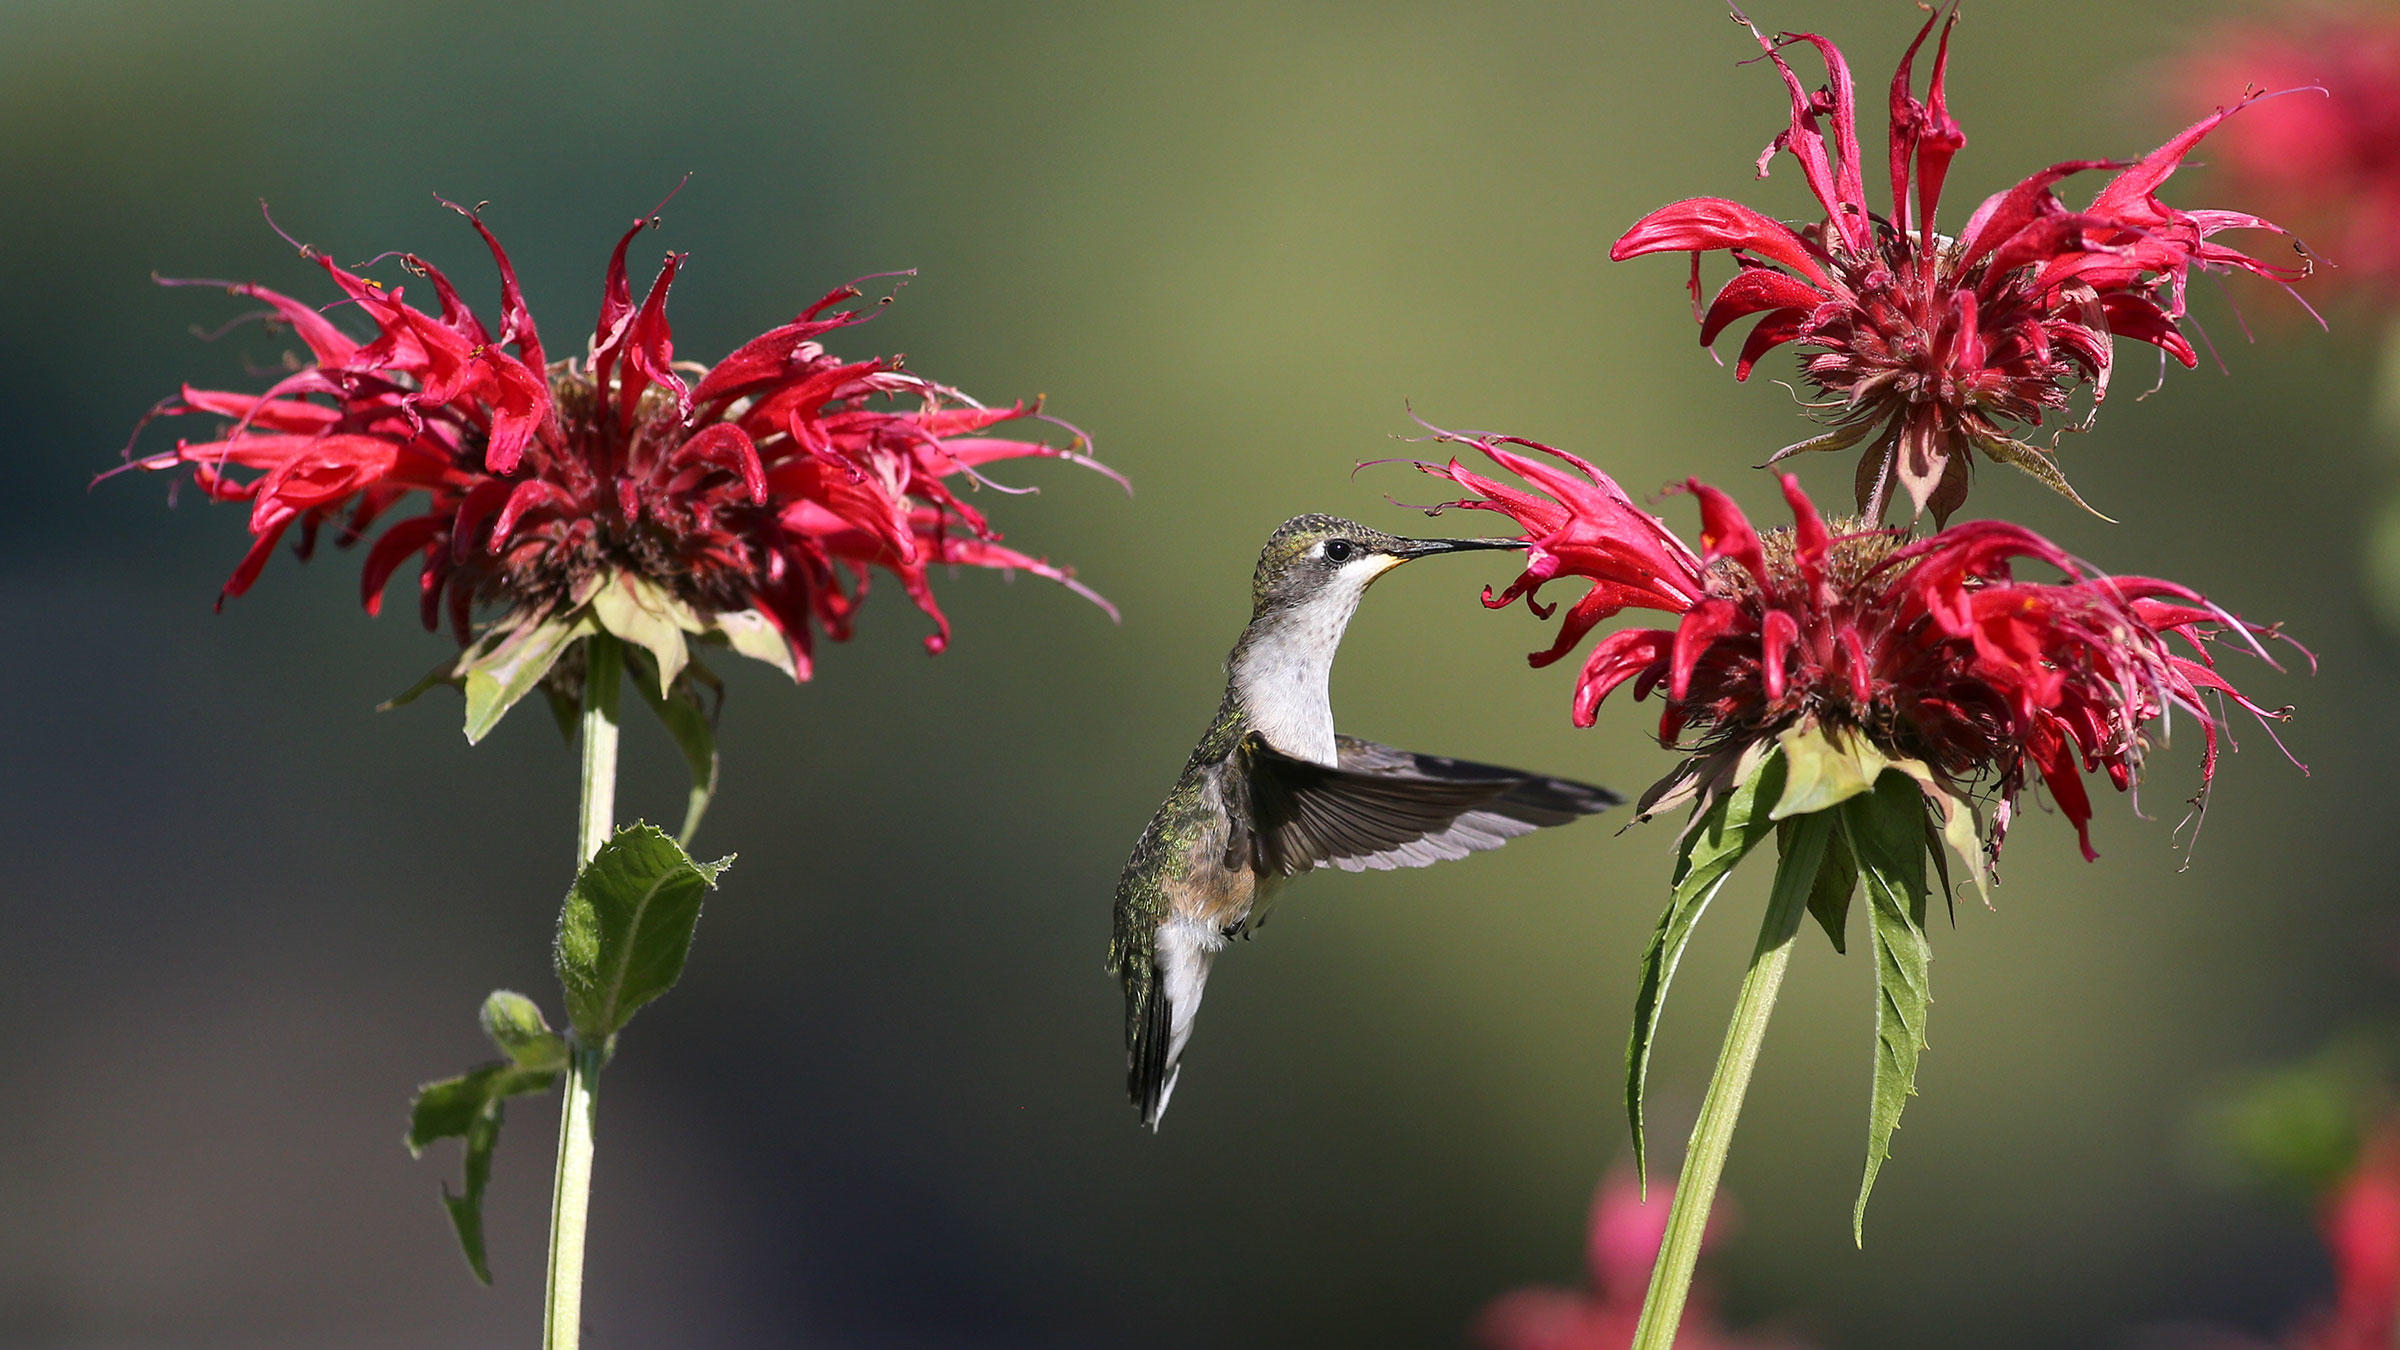 A Broad-tailed Hummingbird drinks nectar from a red flower.